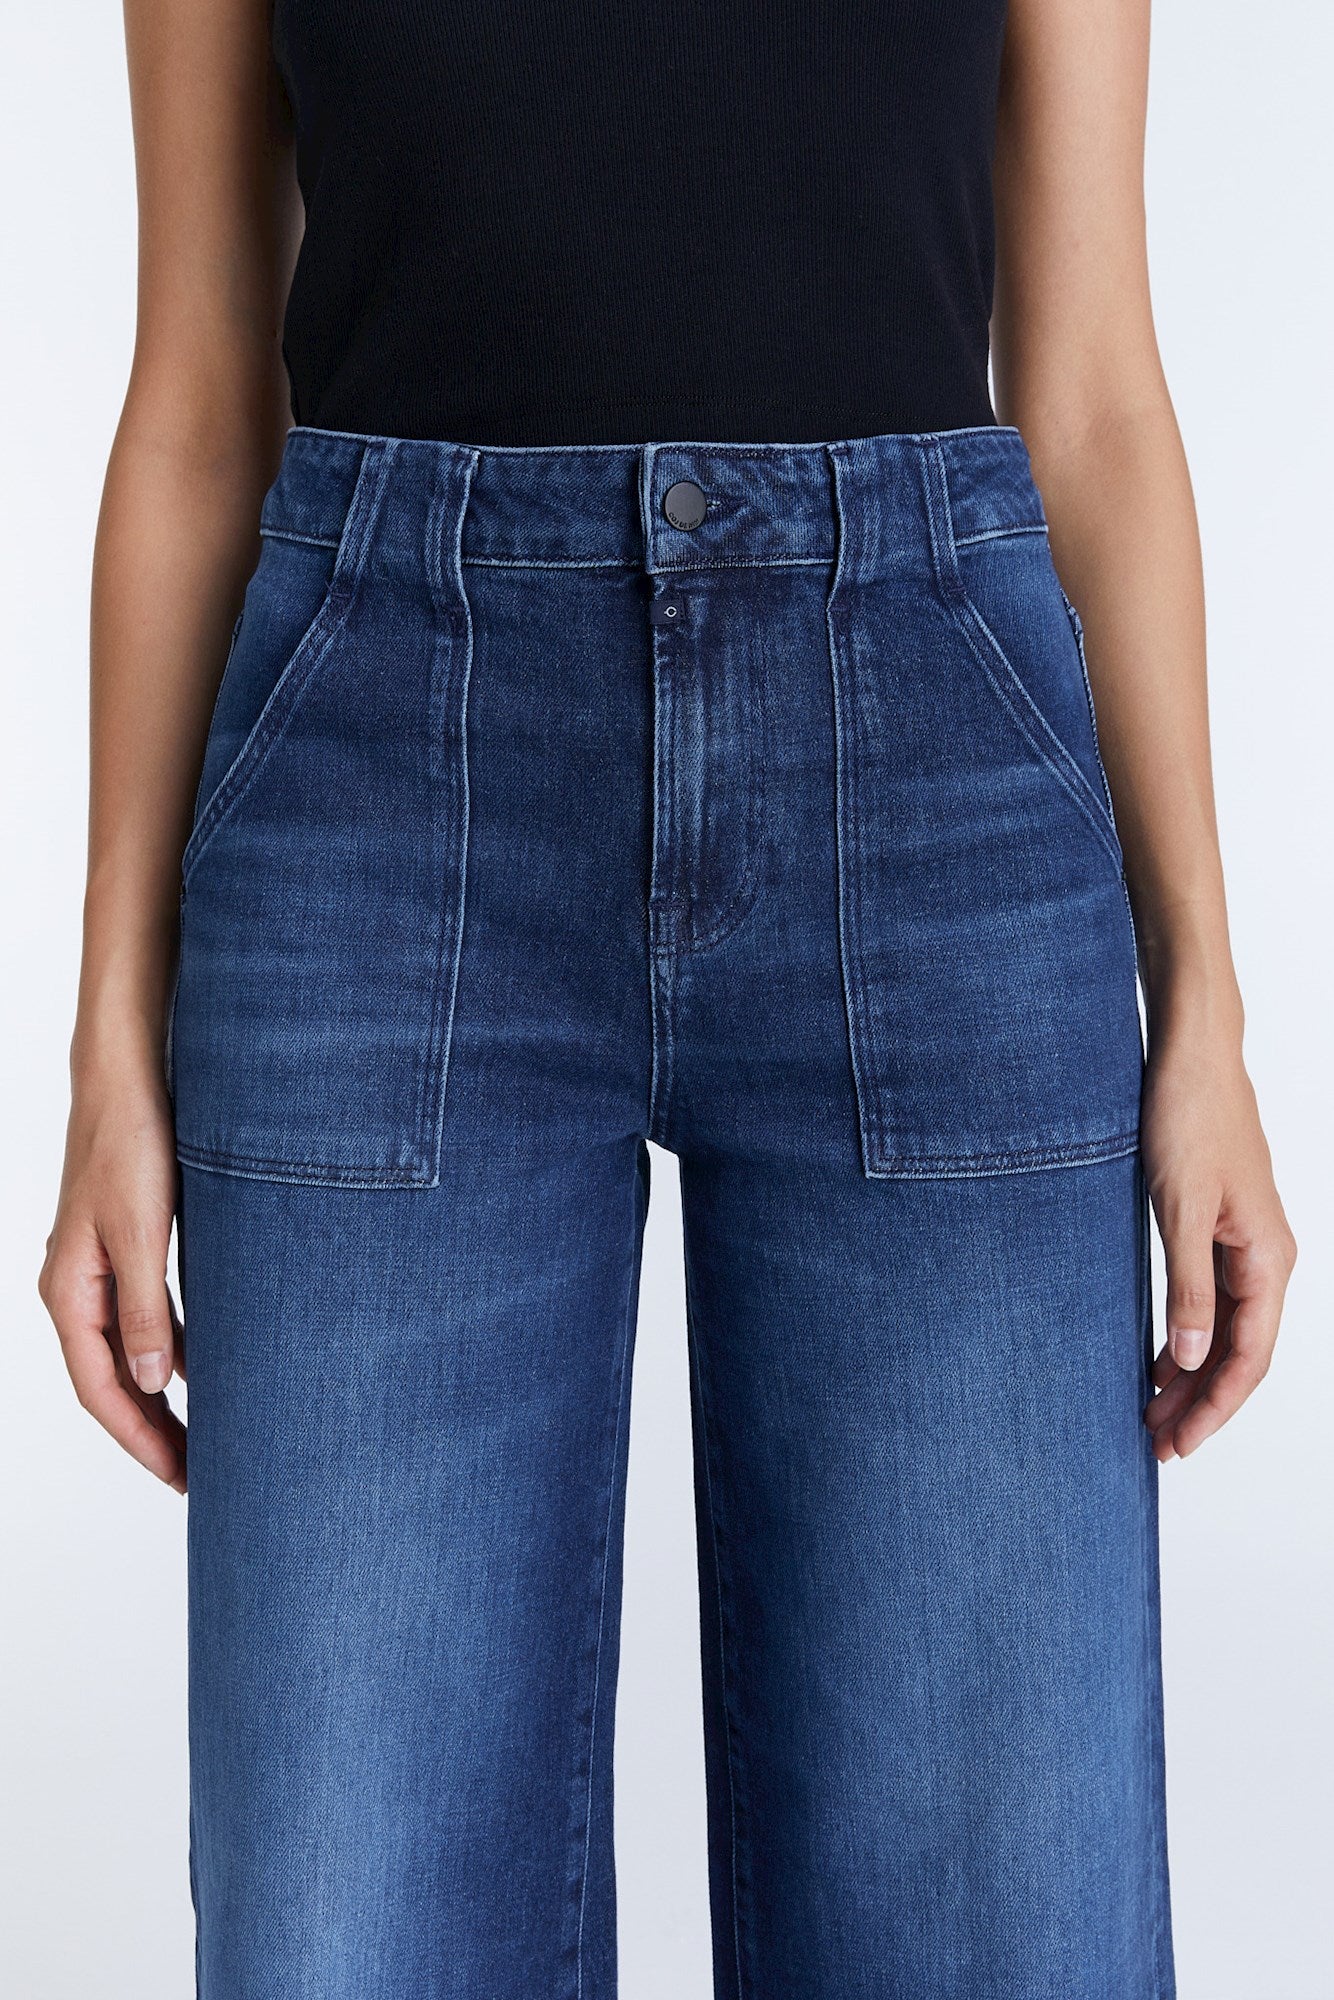 Lulu – Baggy-Jeans mit hoher Taille – Dunkelblau